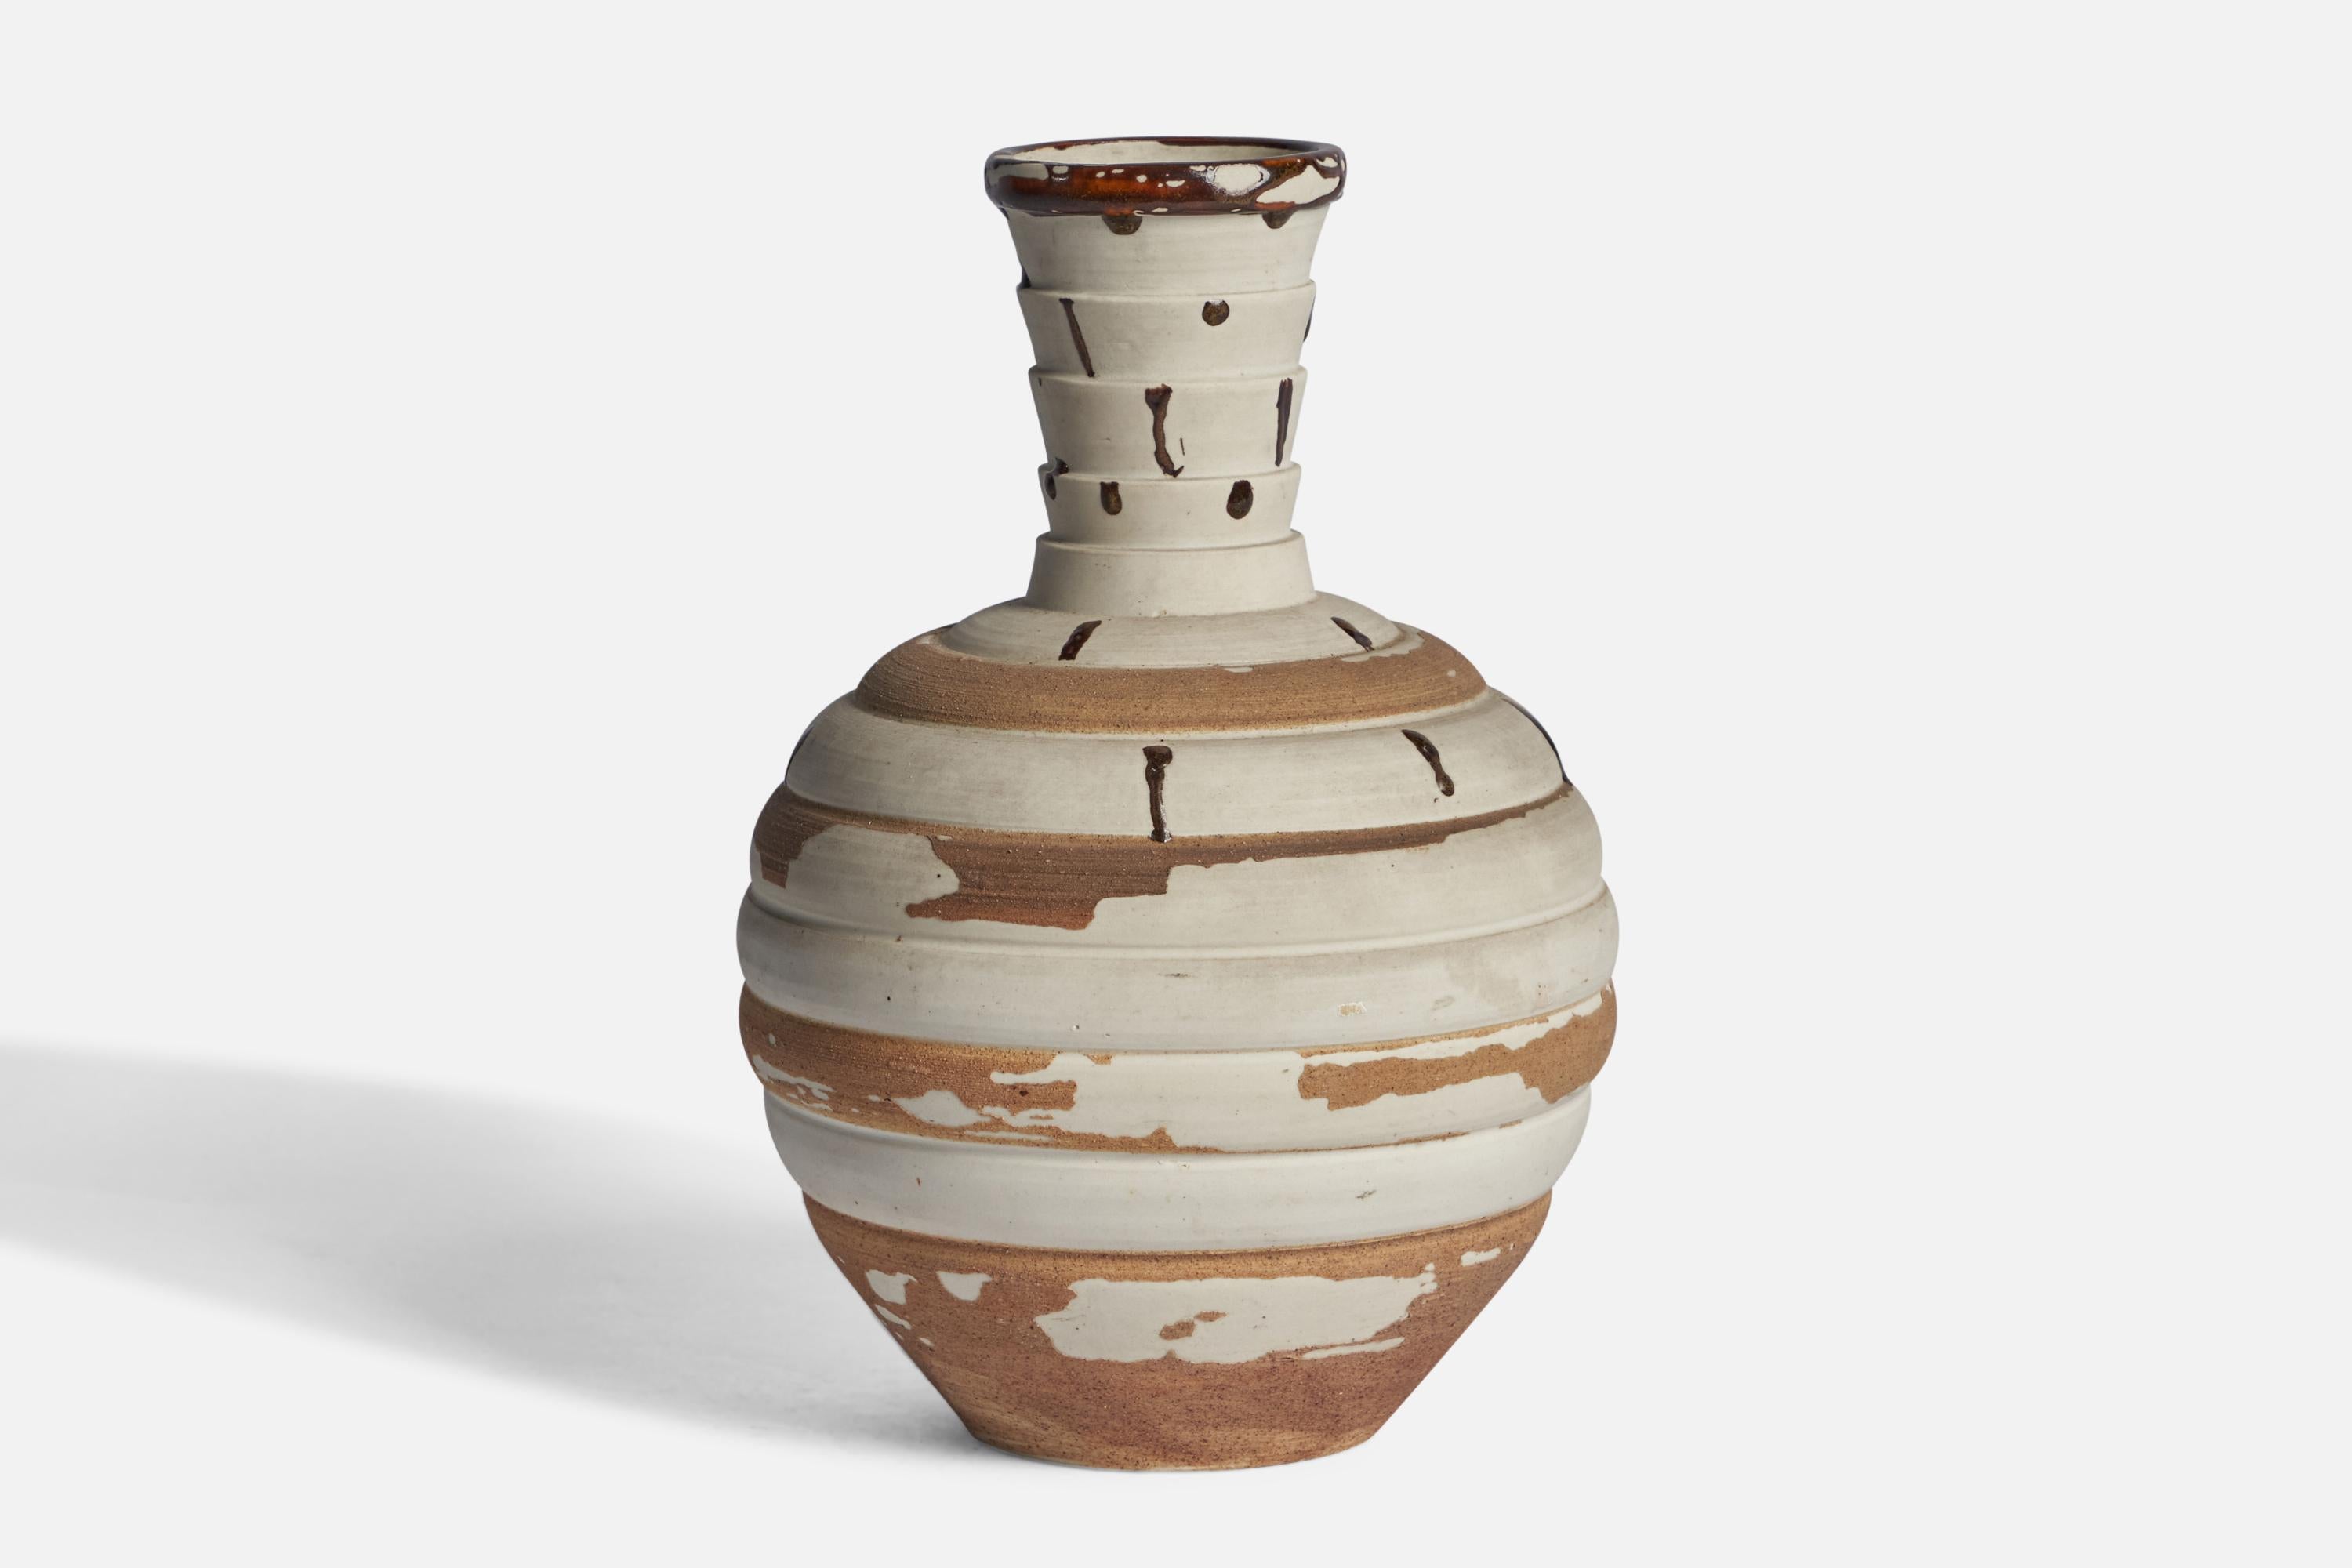 A brown and white sizeable unique stoneware vase designed and produced by Sven Bohlin, Höganäs, Sweden, c. 1960s.